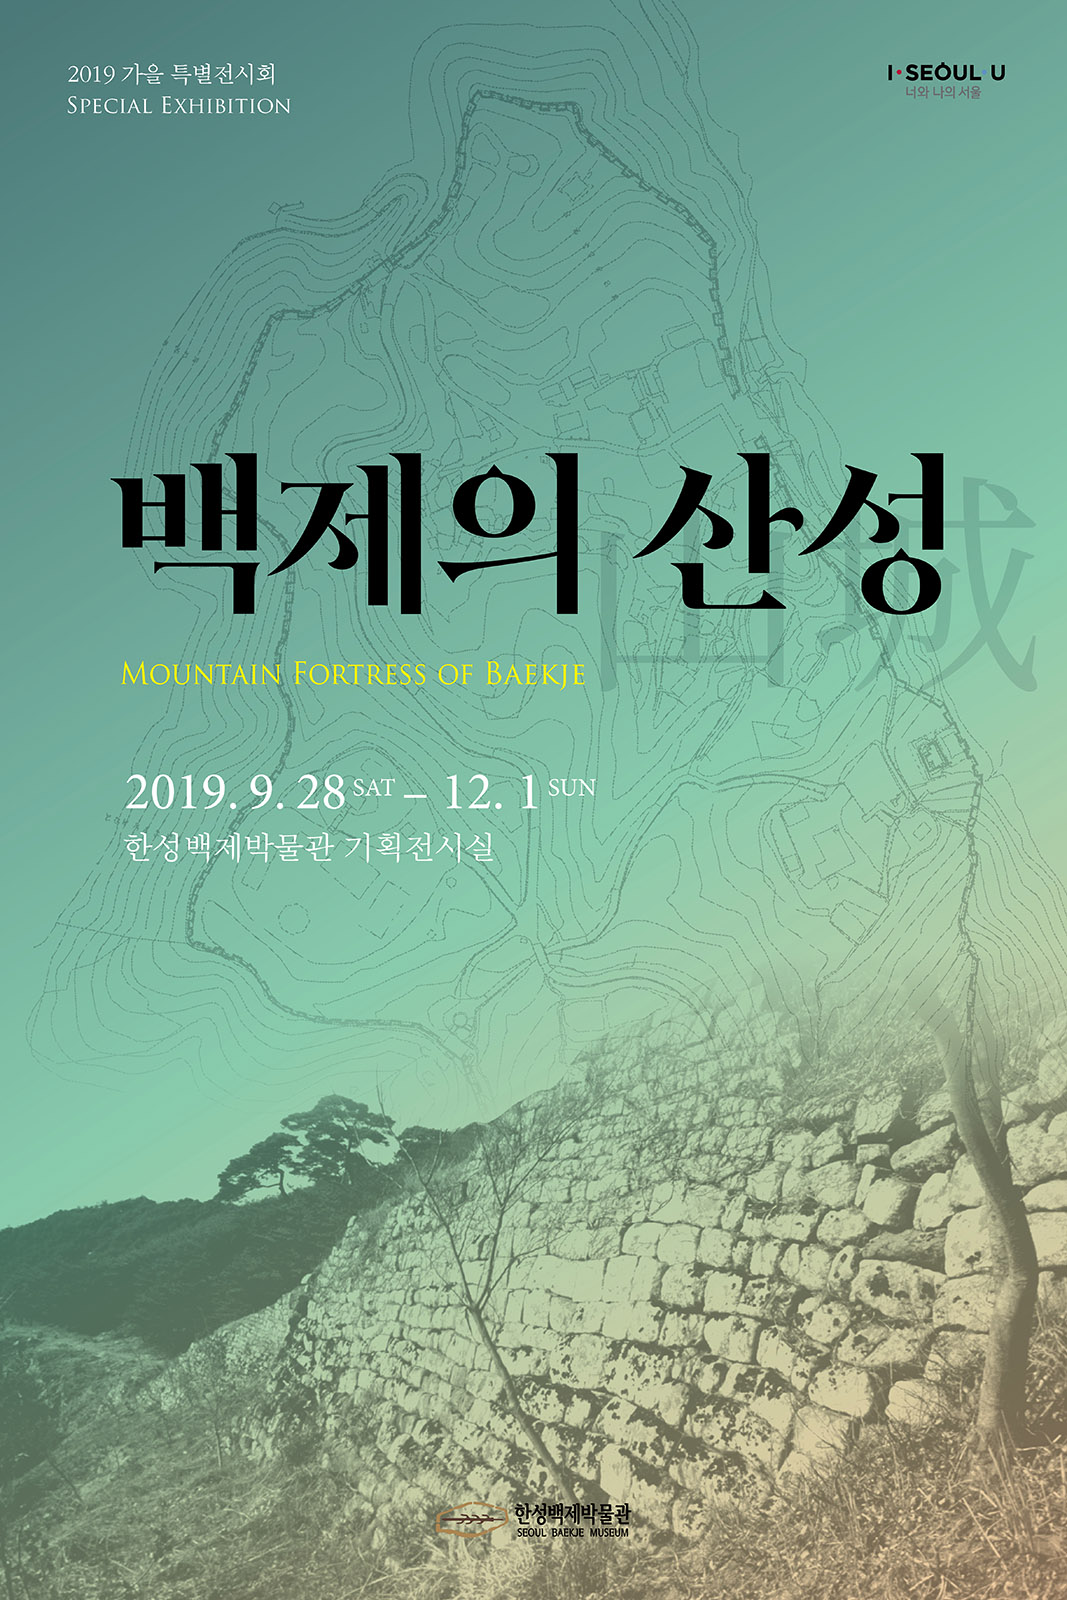 You are currently viewing 2019 가을특별전시회 [백제의 산성]